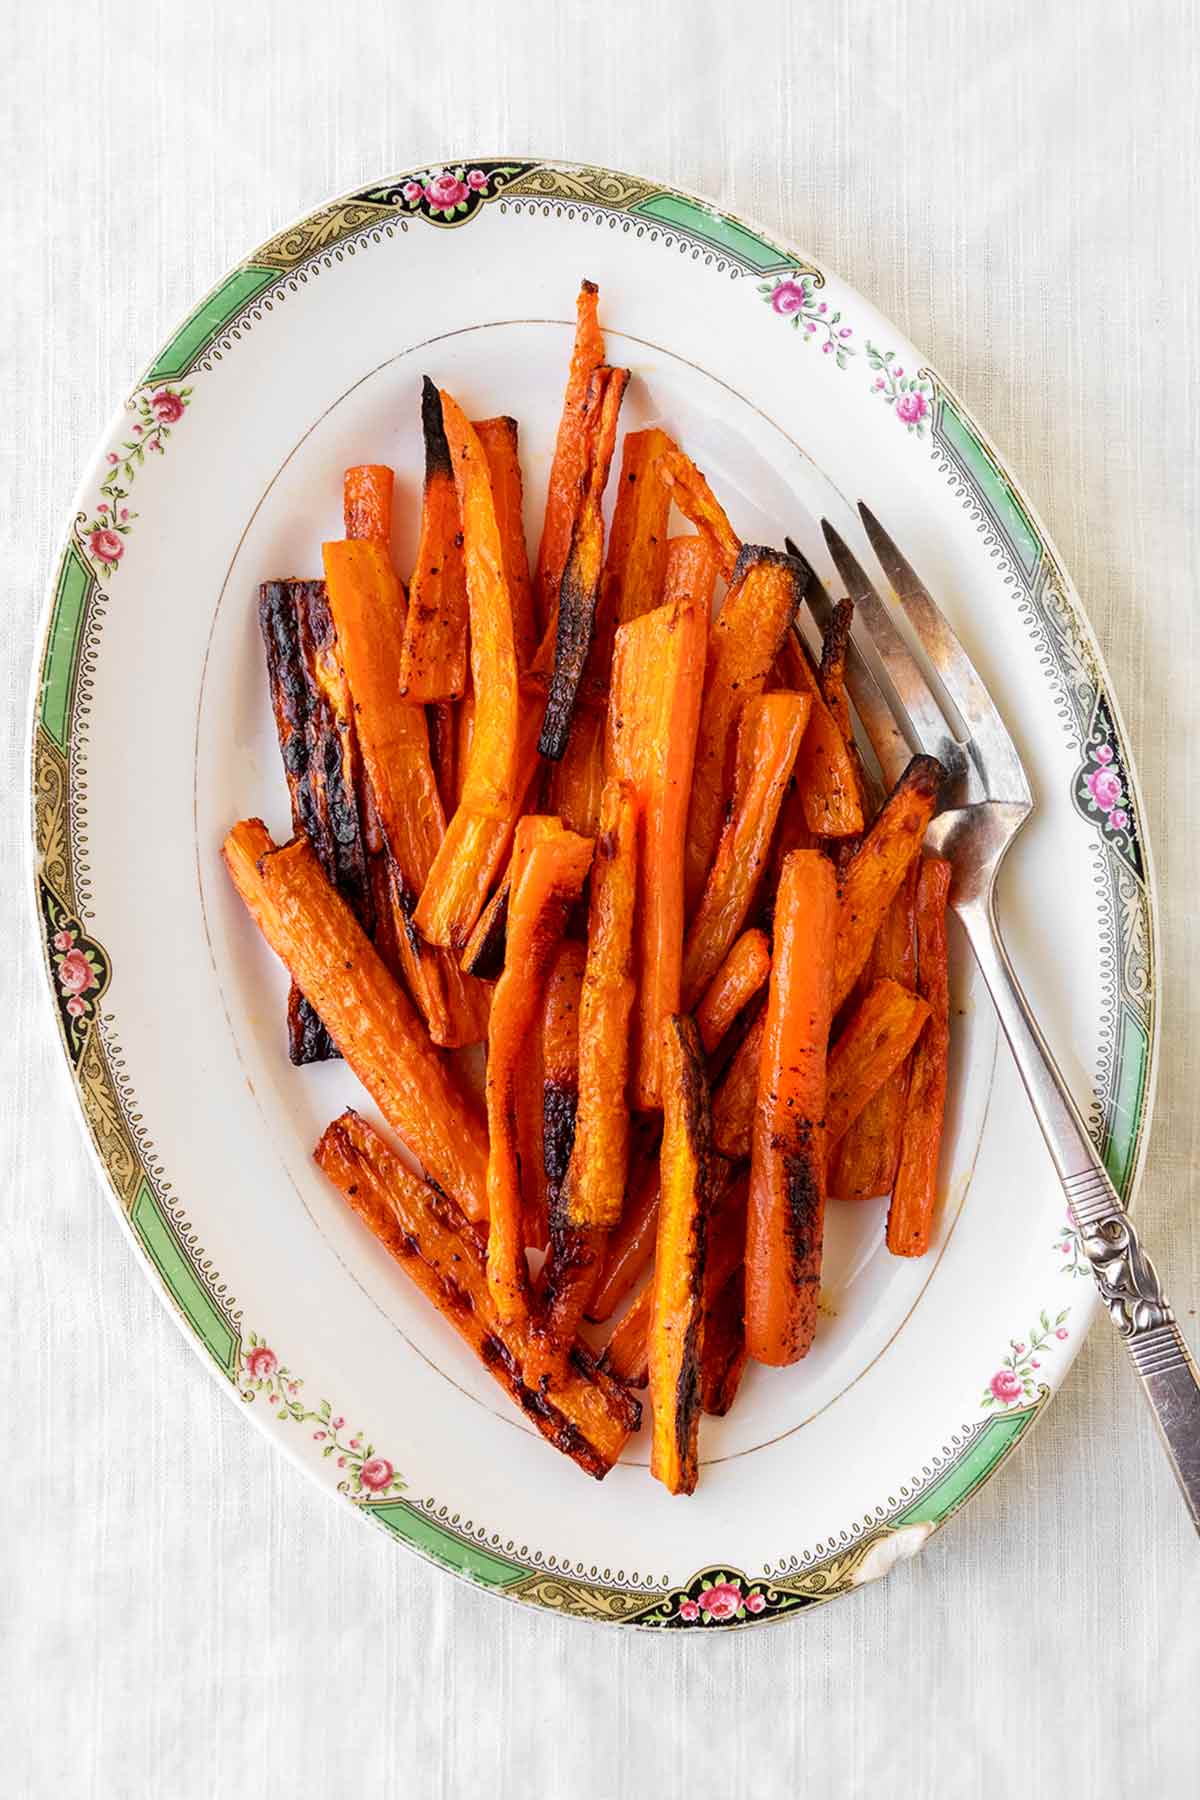 An oval platter filled with roasted carrots and a silver serving fork on the side.